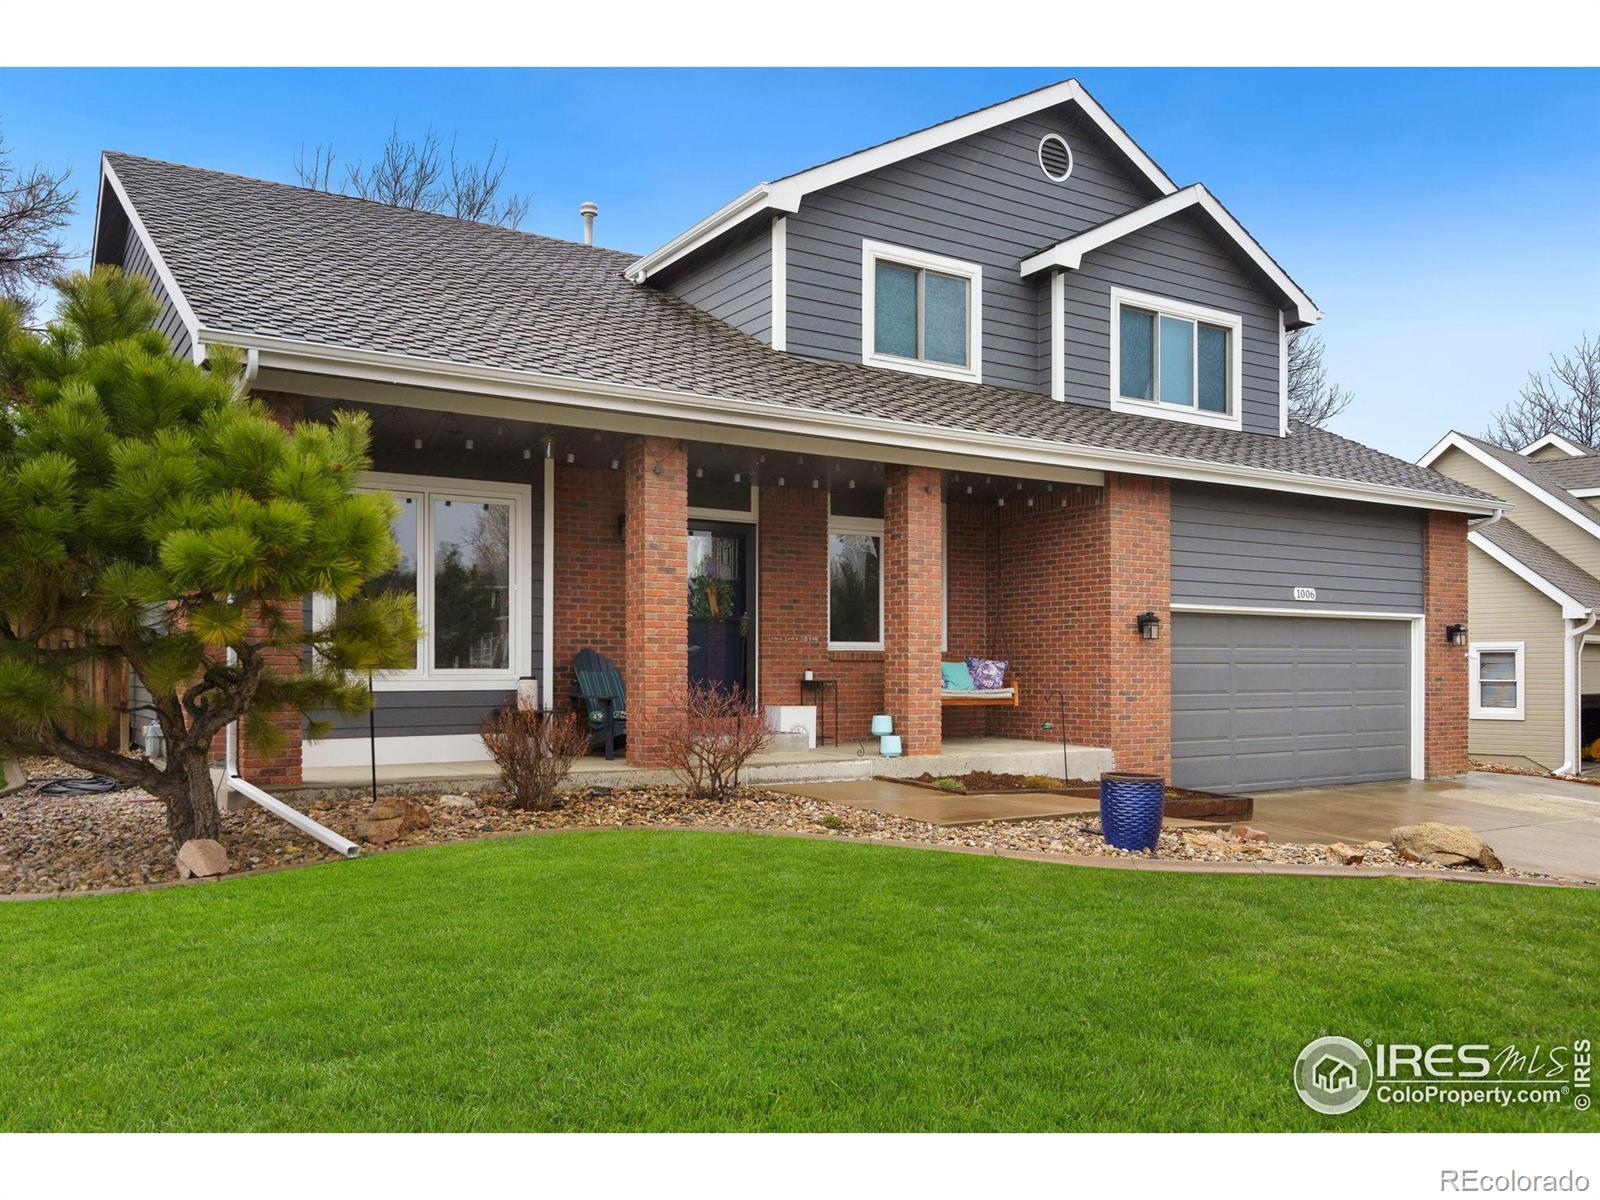 Report Image for 1006  Hinsdale Drive,Fort Collins, Colorado